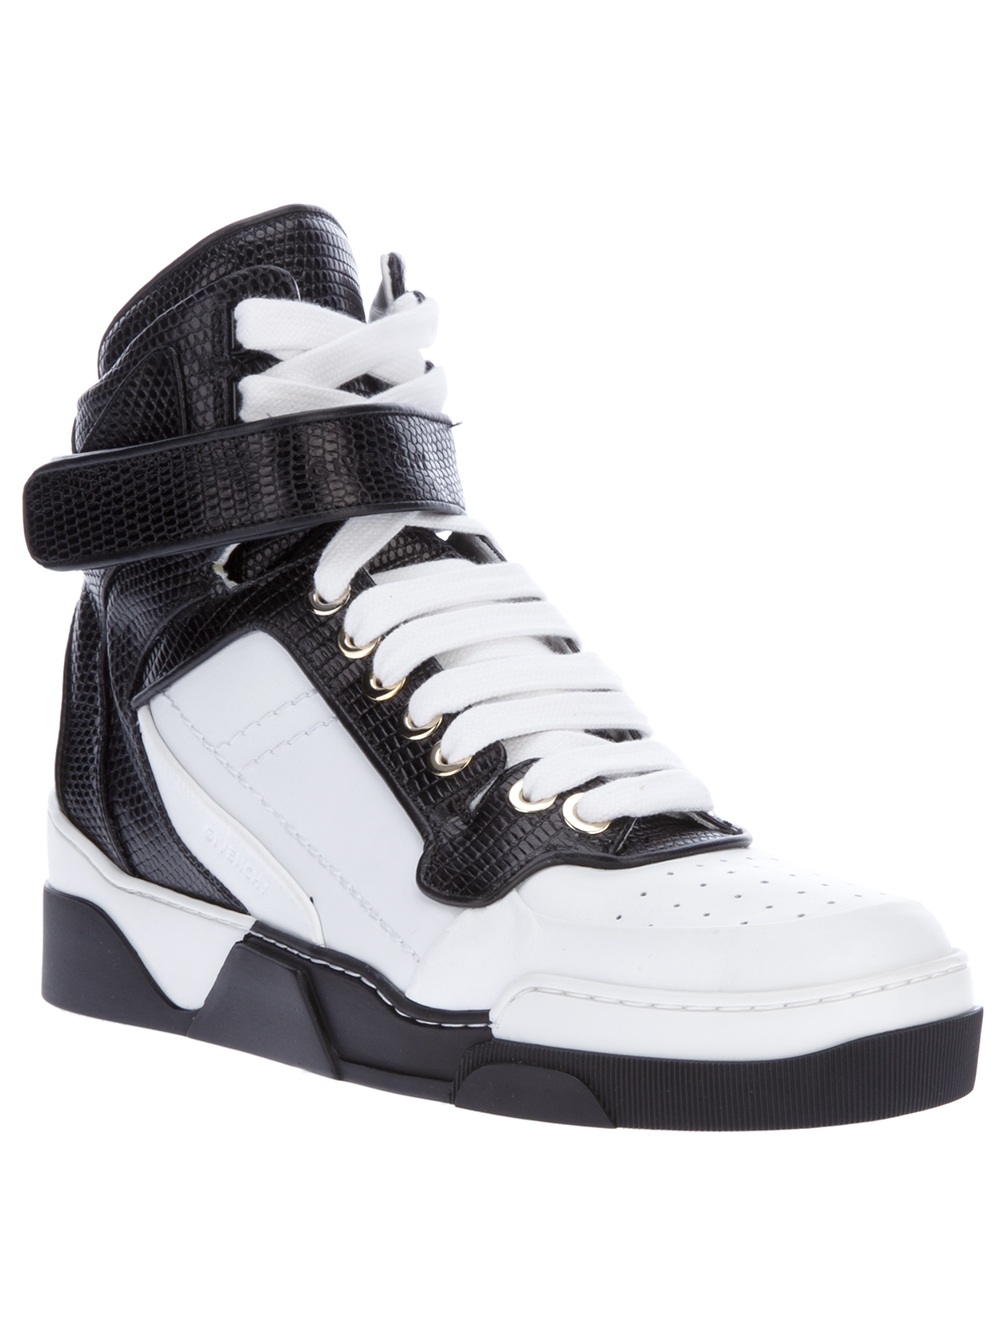 All Hail The High Top: Givenchy Contrast High Top Sneaker | SHOEOGRAPHY